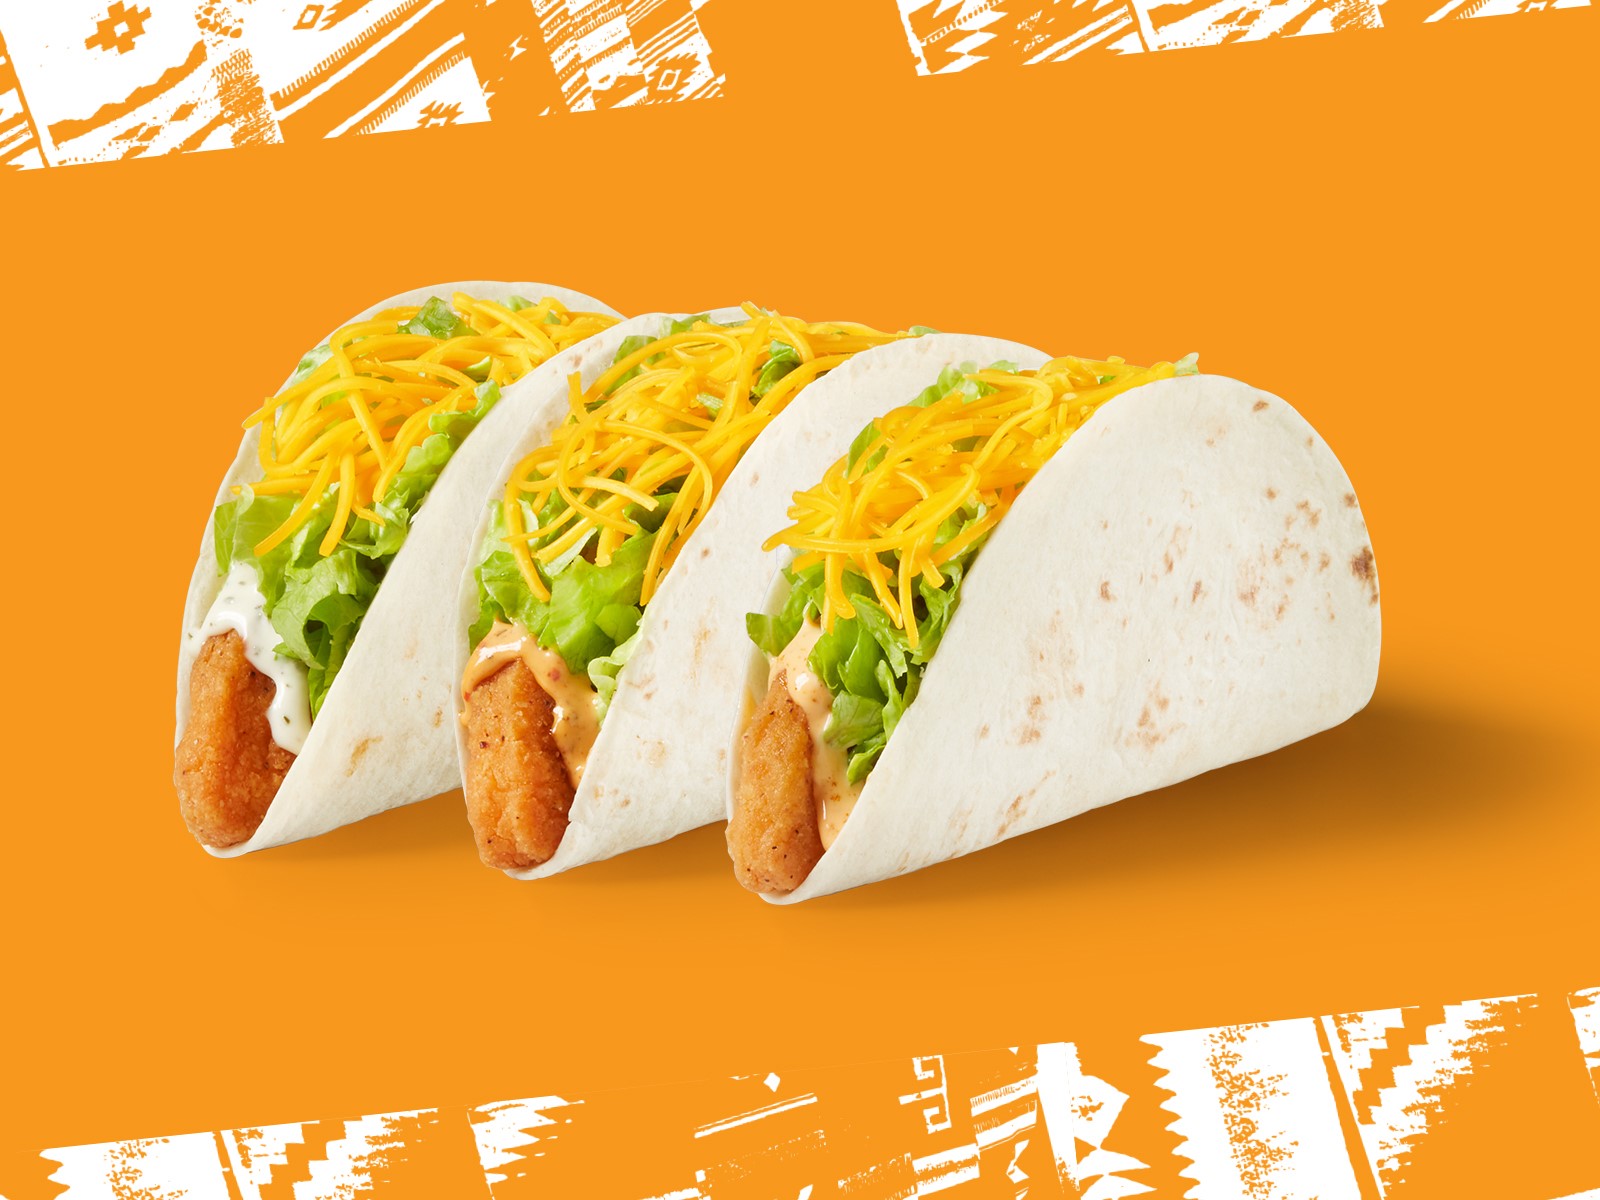 Get Del Taco's Crispy Chicken Tacos 2 for $3 for a limited time.